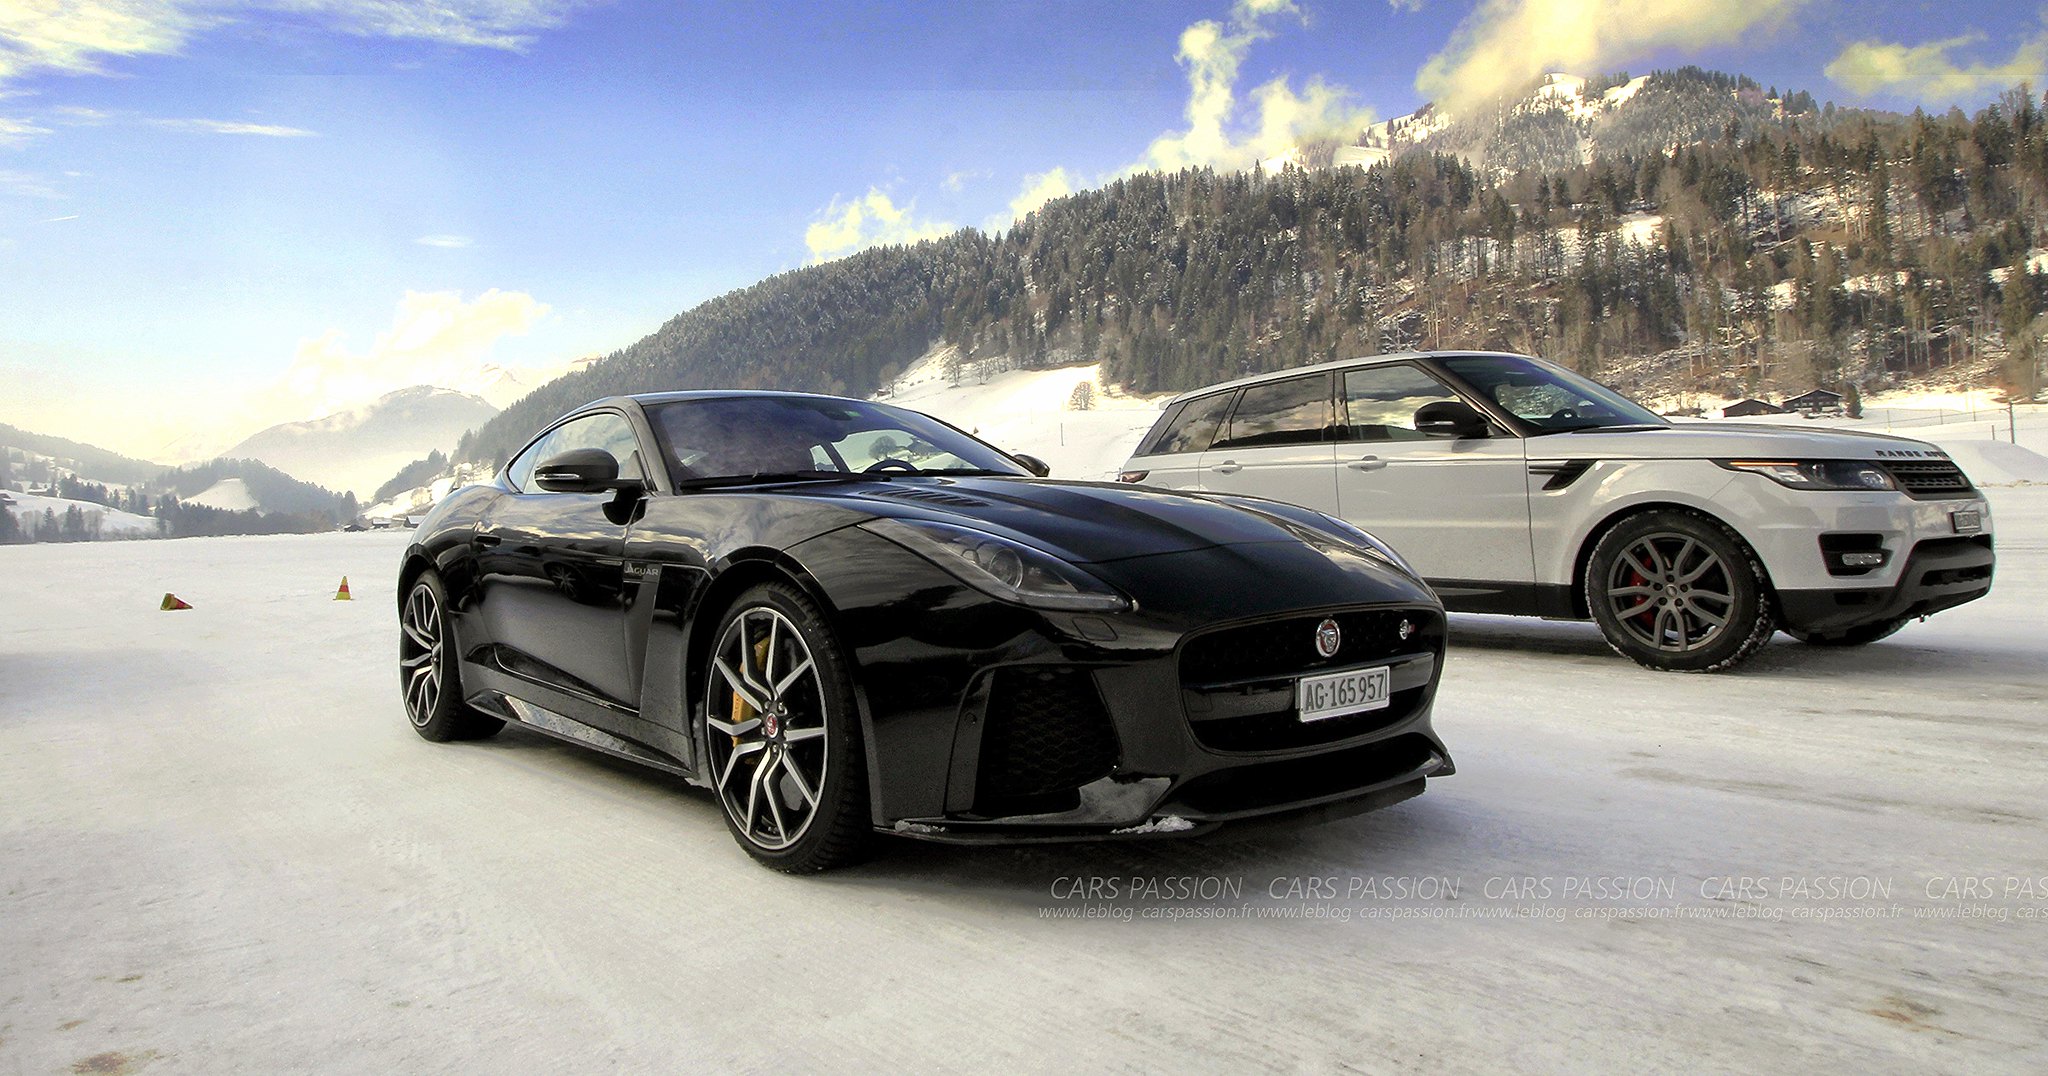 jaguar-land-rover-ice-drivng-esperience-gstaad (14)